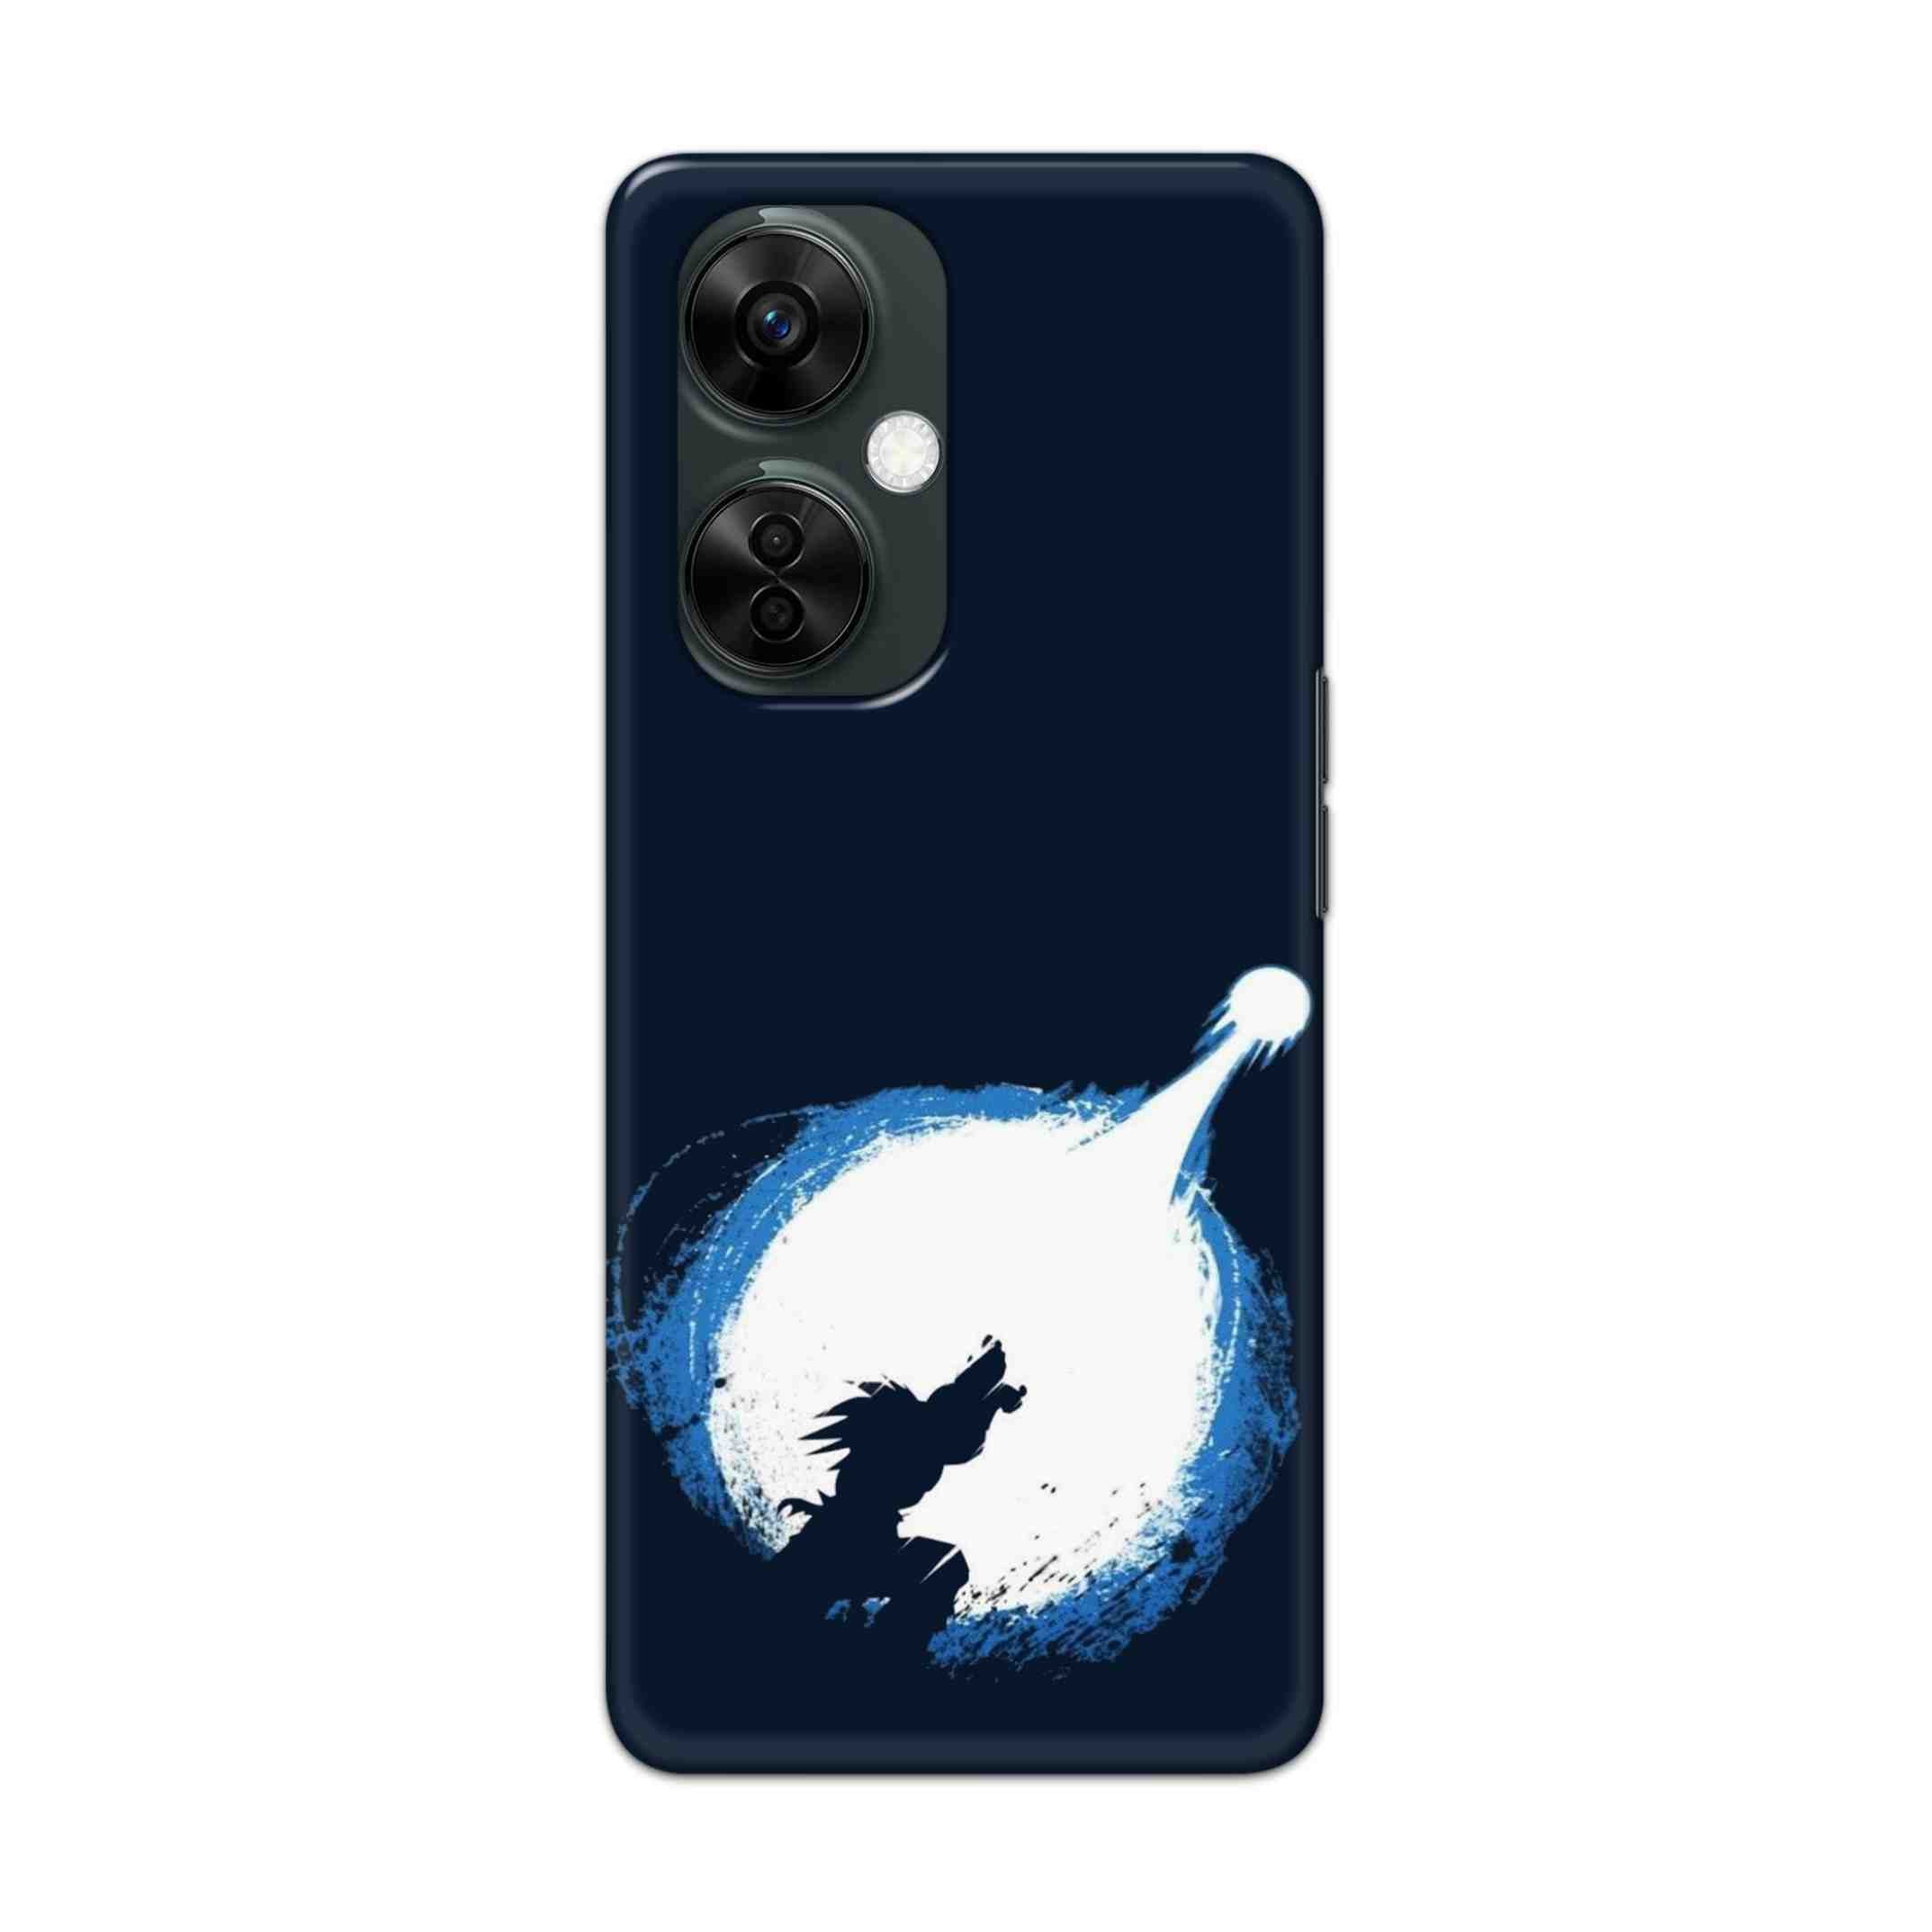 Buy Goku Power Hard Back Mobile Phone Case Cover For Oneplus Nord CE 3 Lite Online